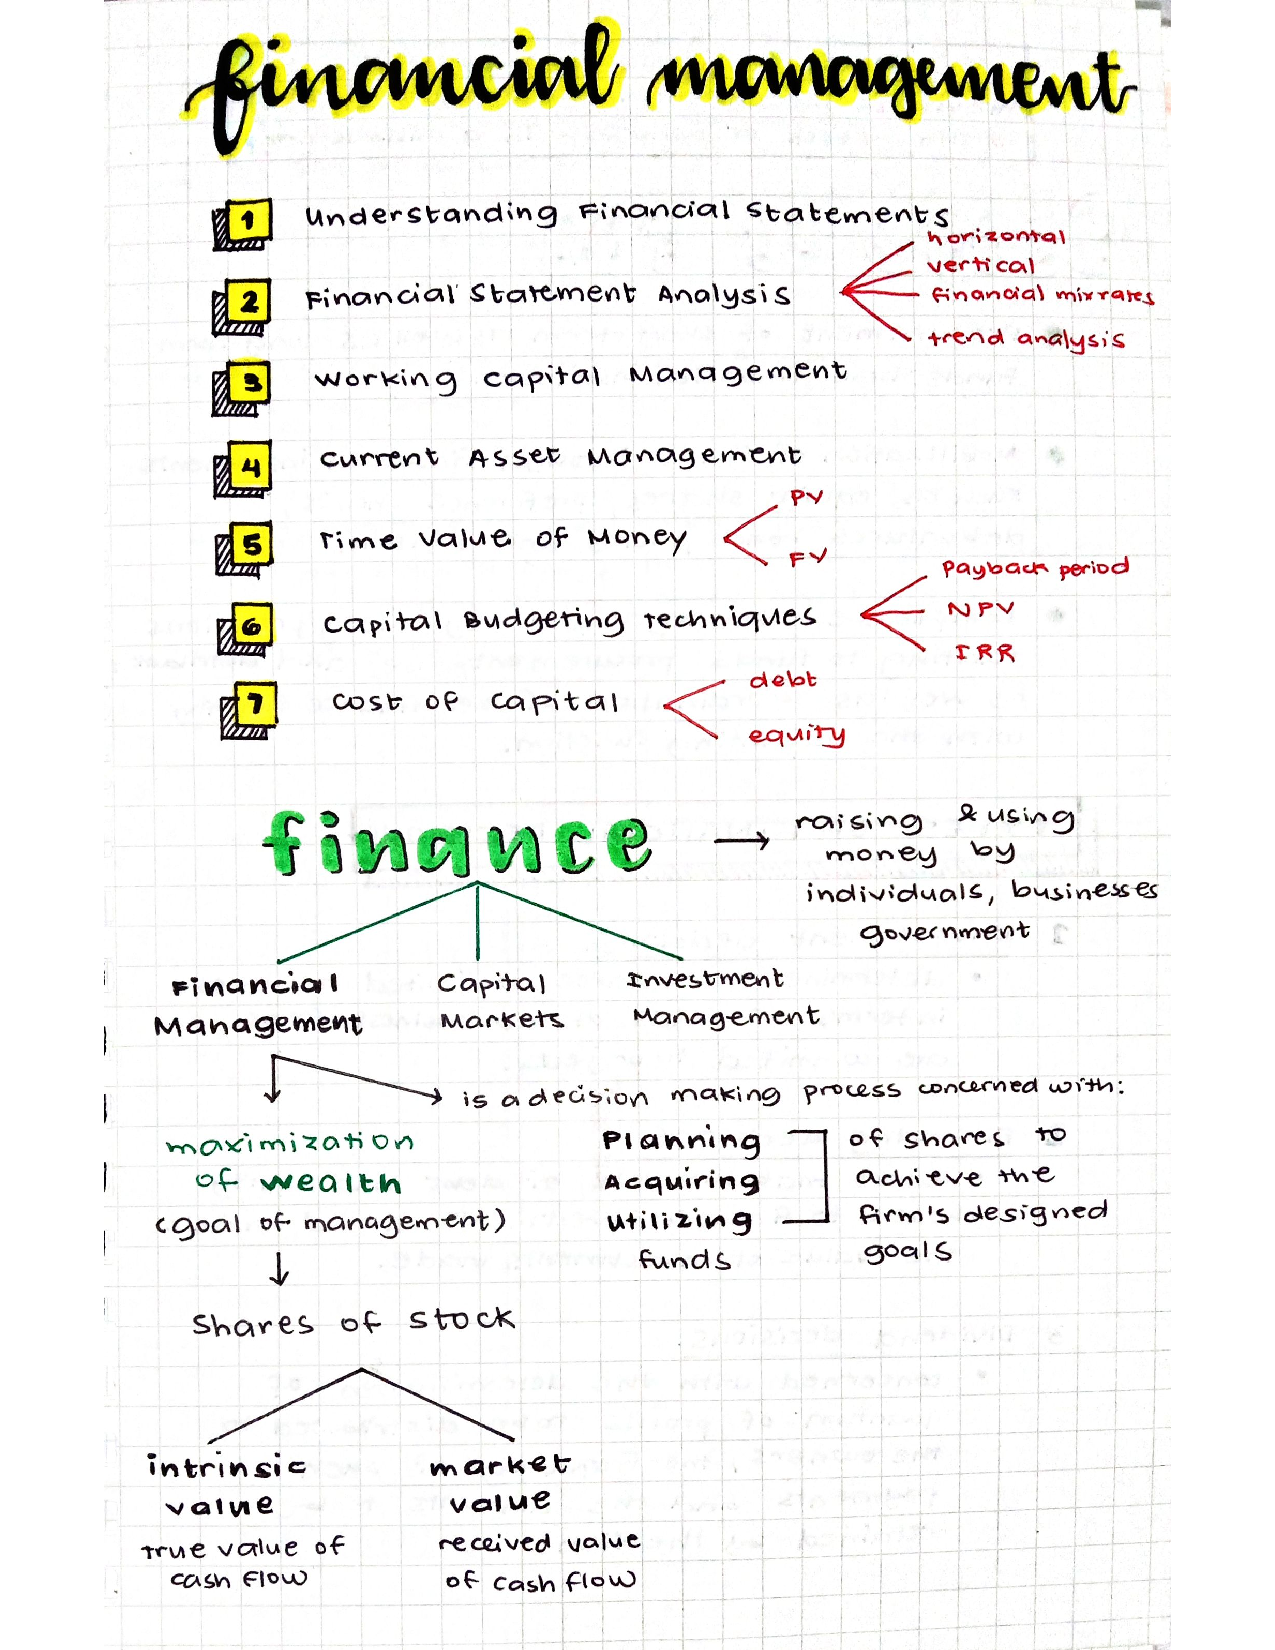 Study notes on financial management